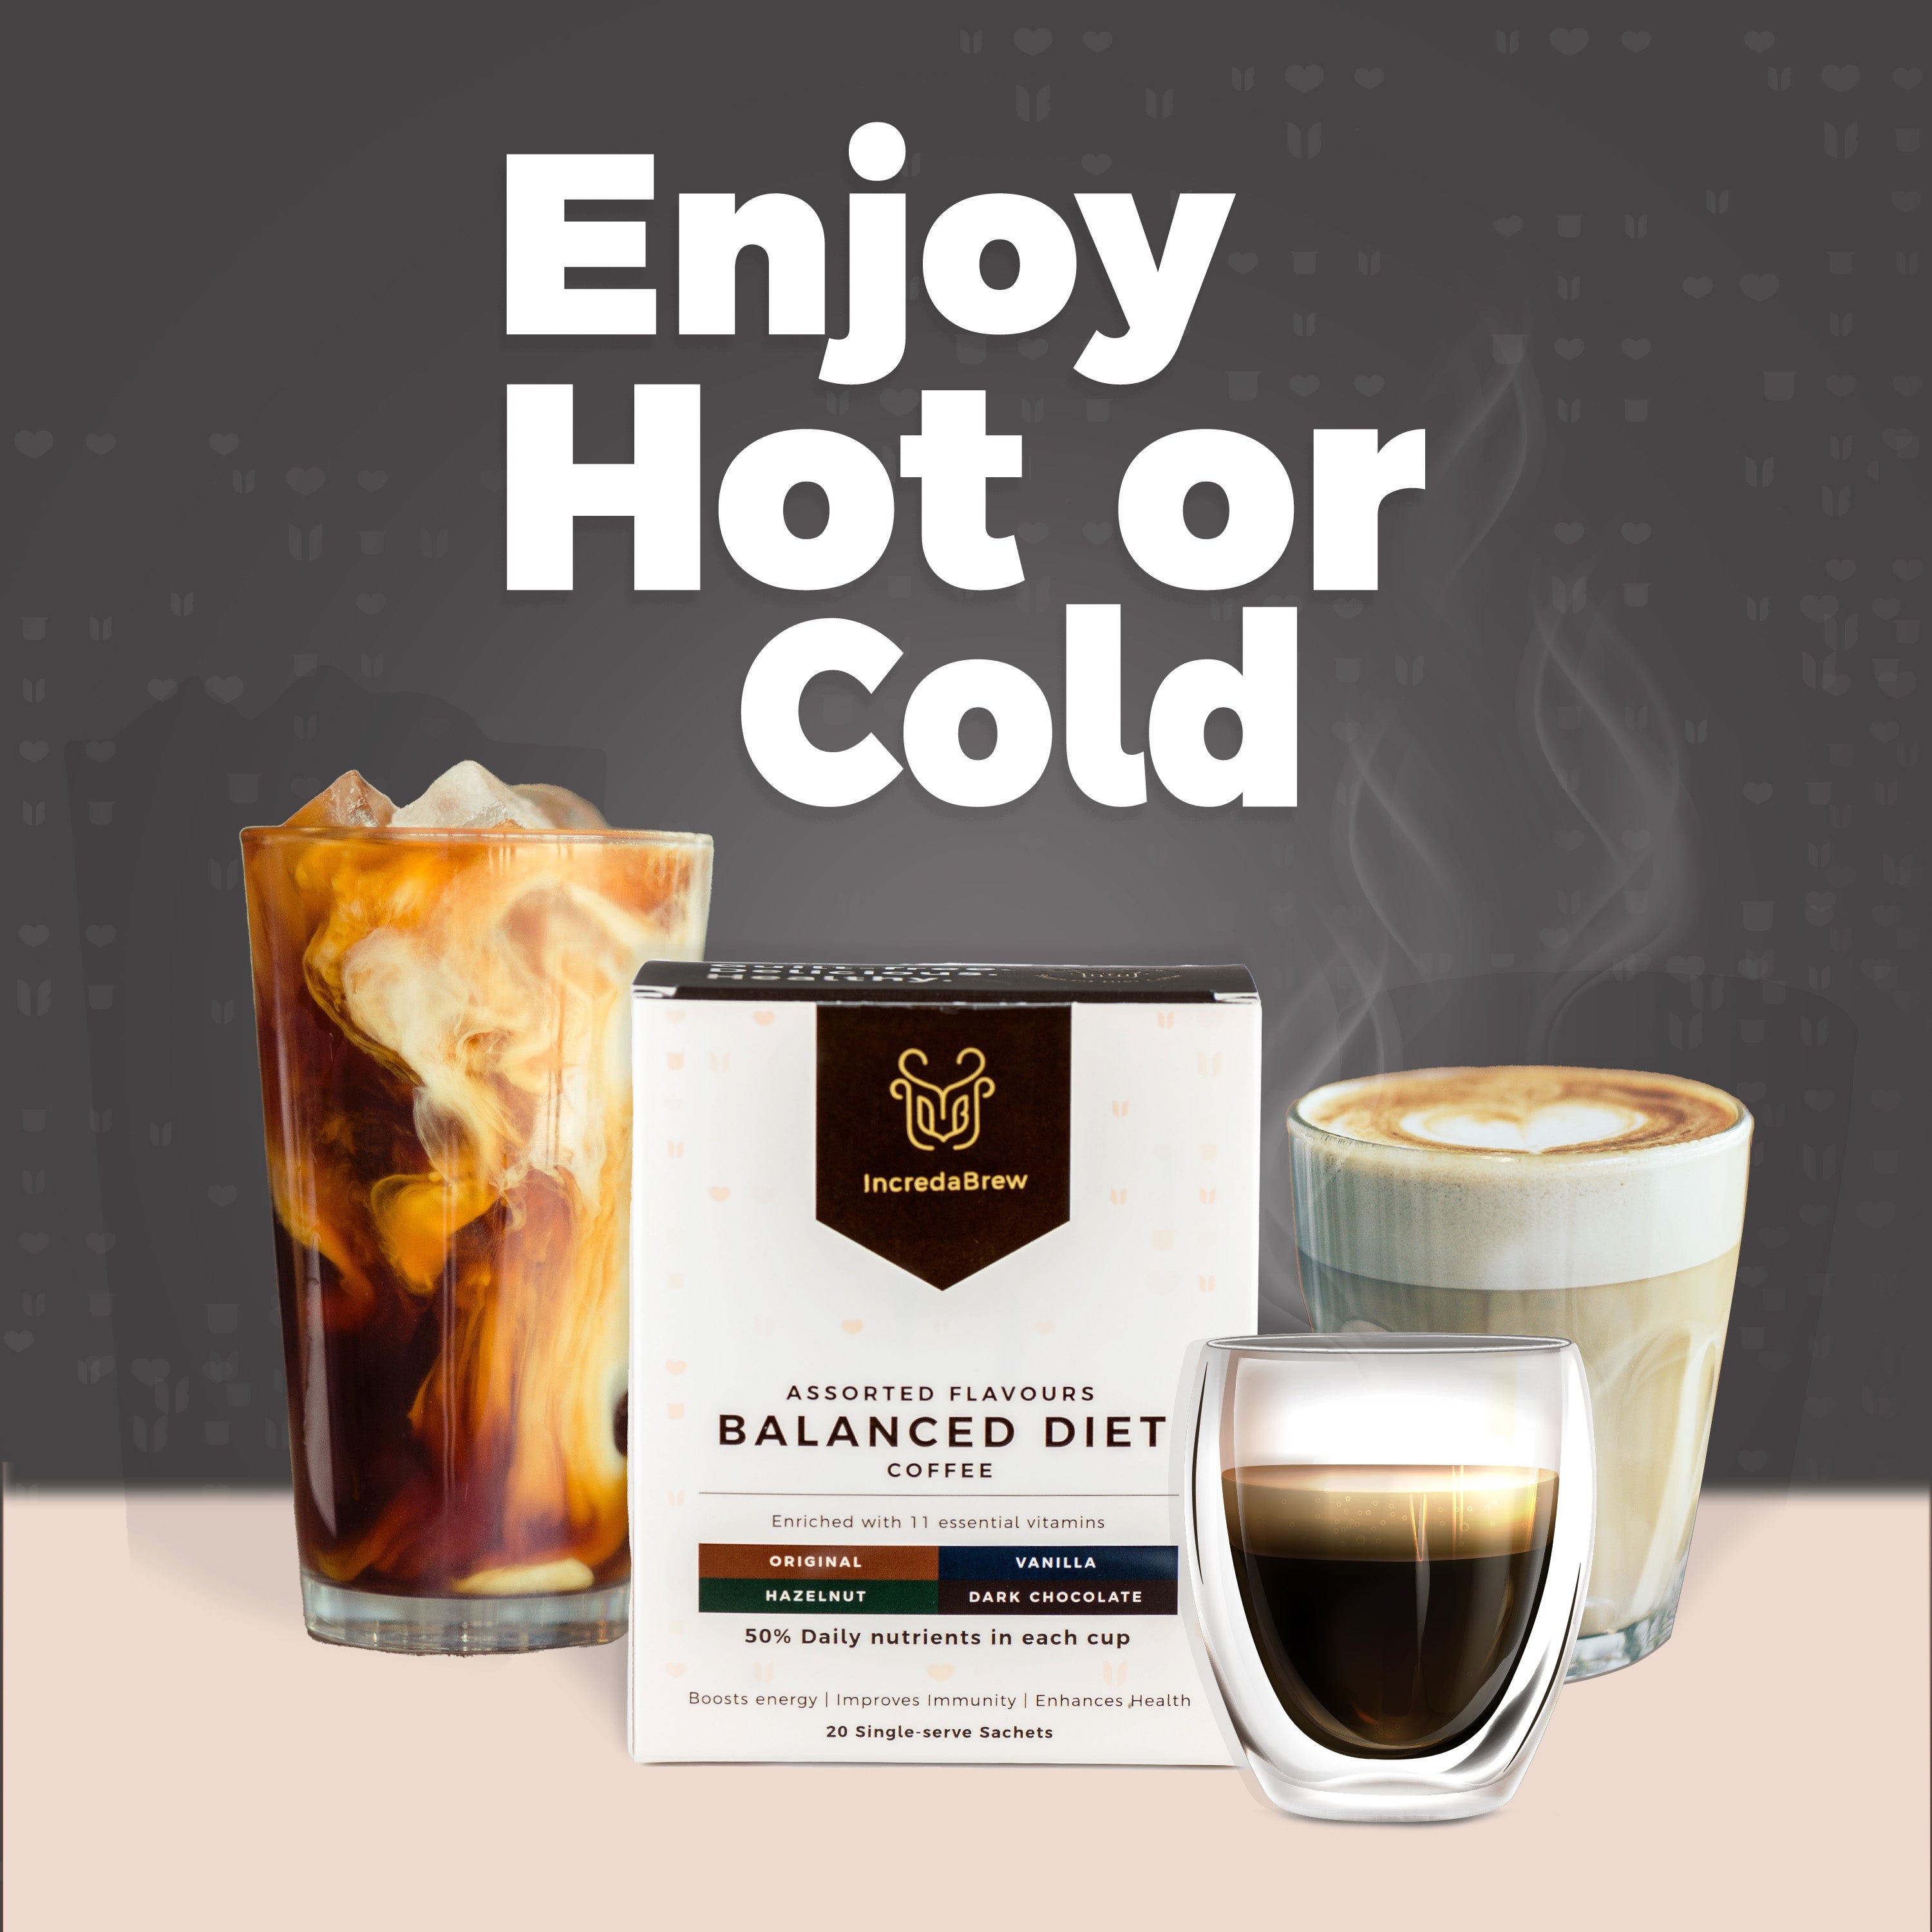 Enjoy Instant Coffee Hot or Cold